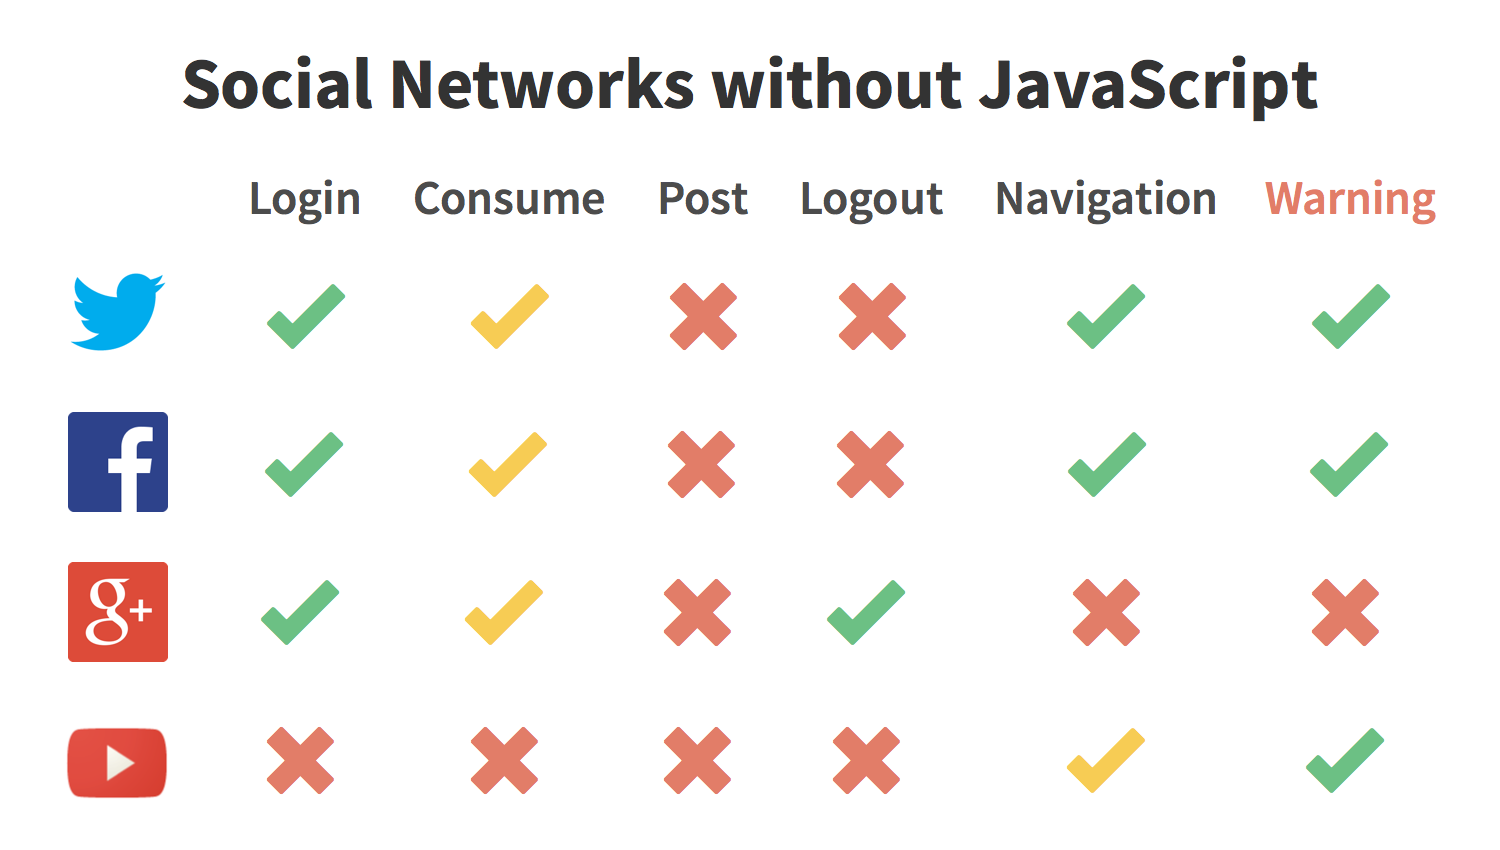 Social Networks without JavaScript
statistic